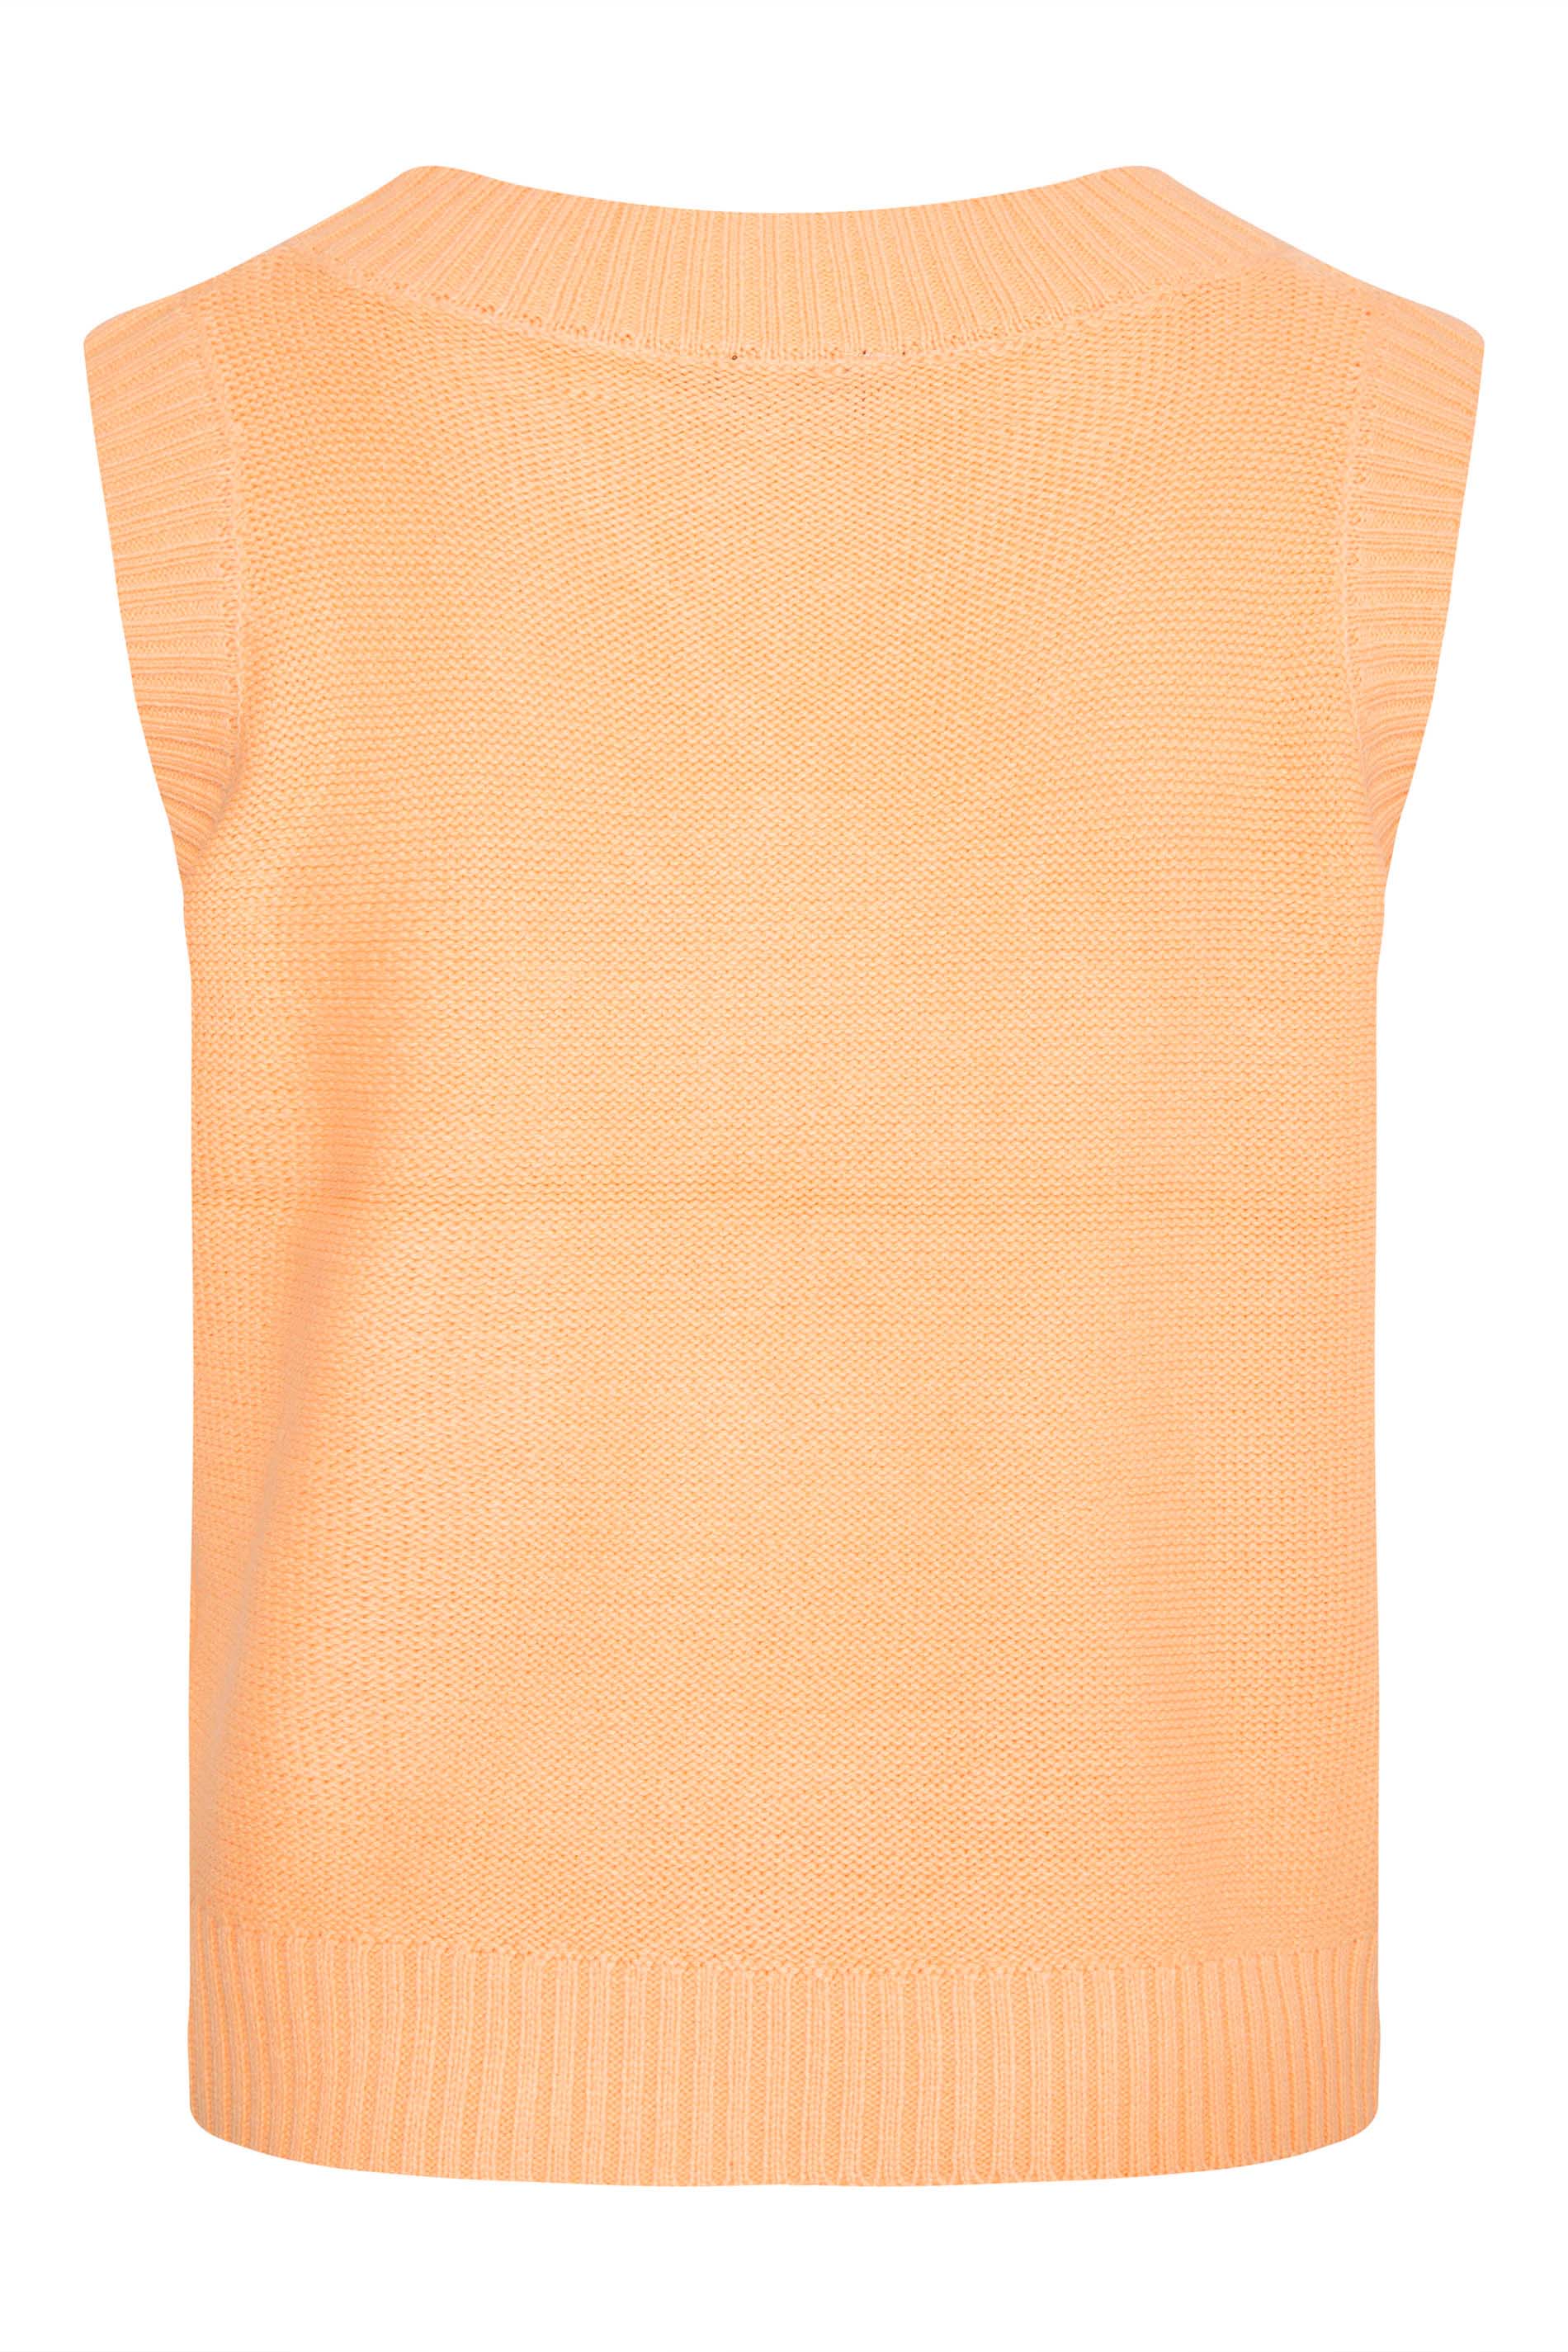 Plus Size Bright Orange Cable Knit Sweater Vest Top | Yours Clothing